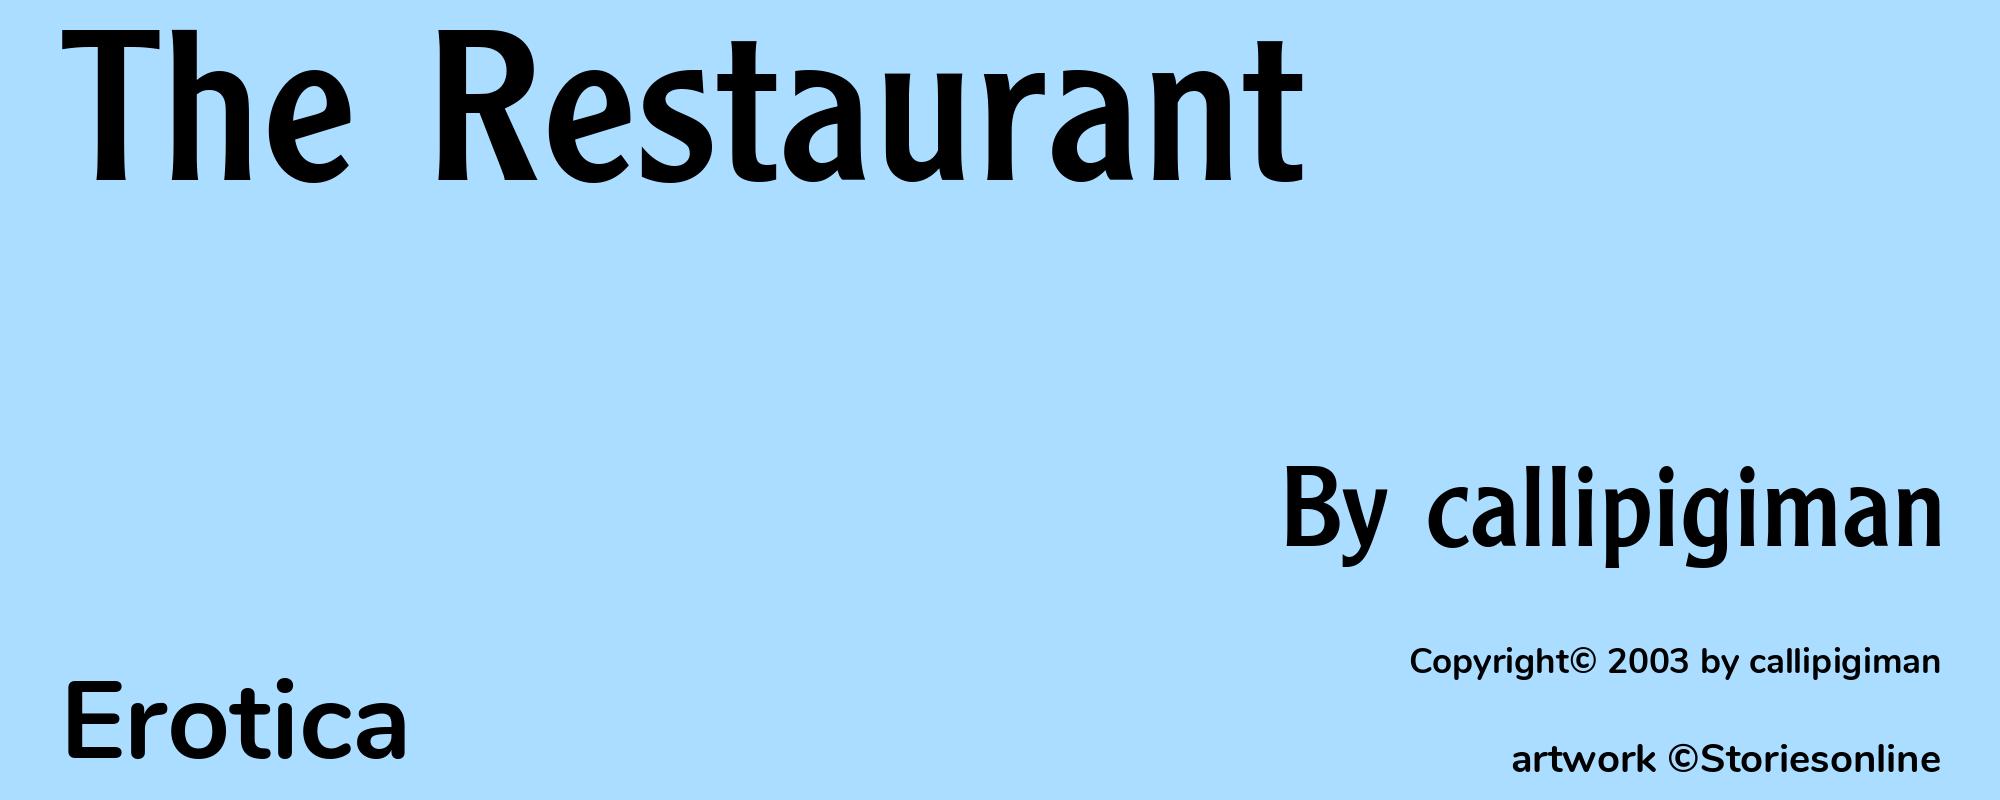 The Restaurant - Cover